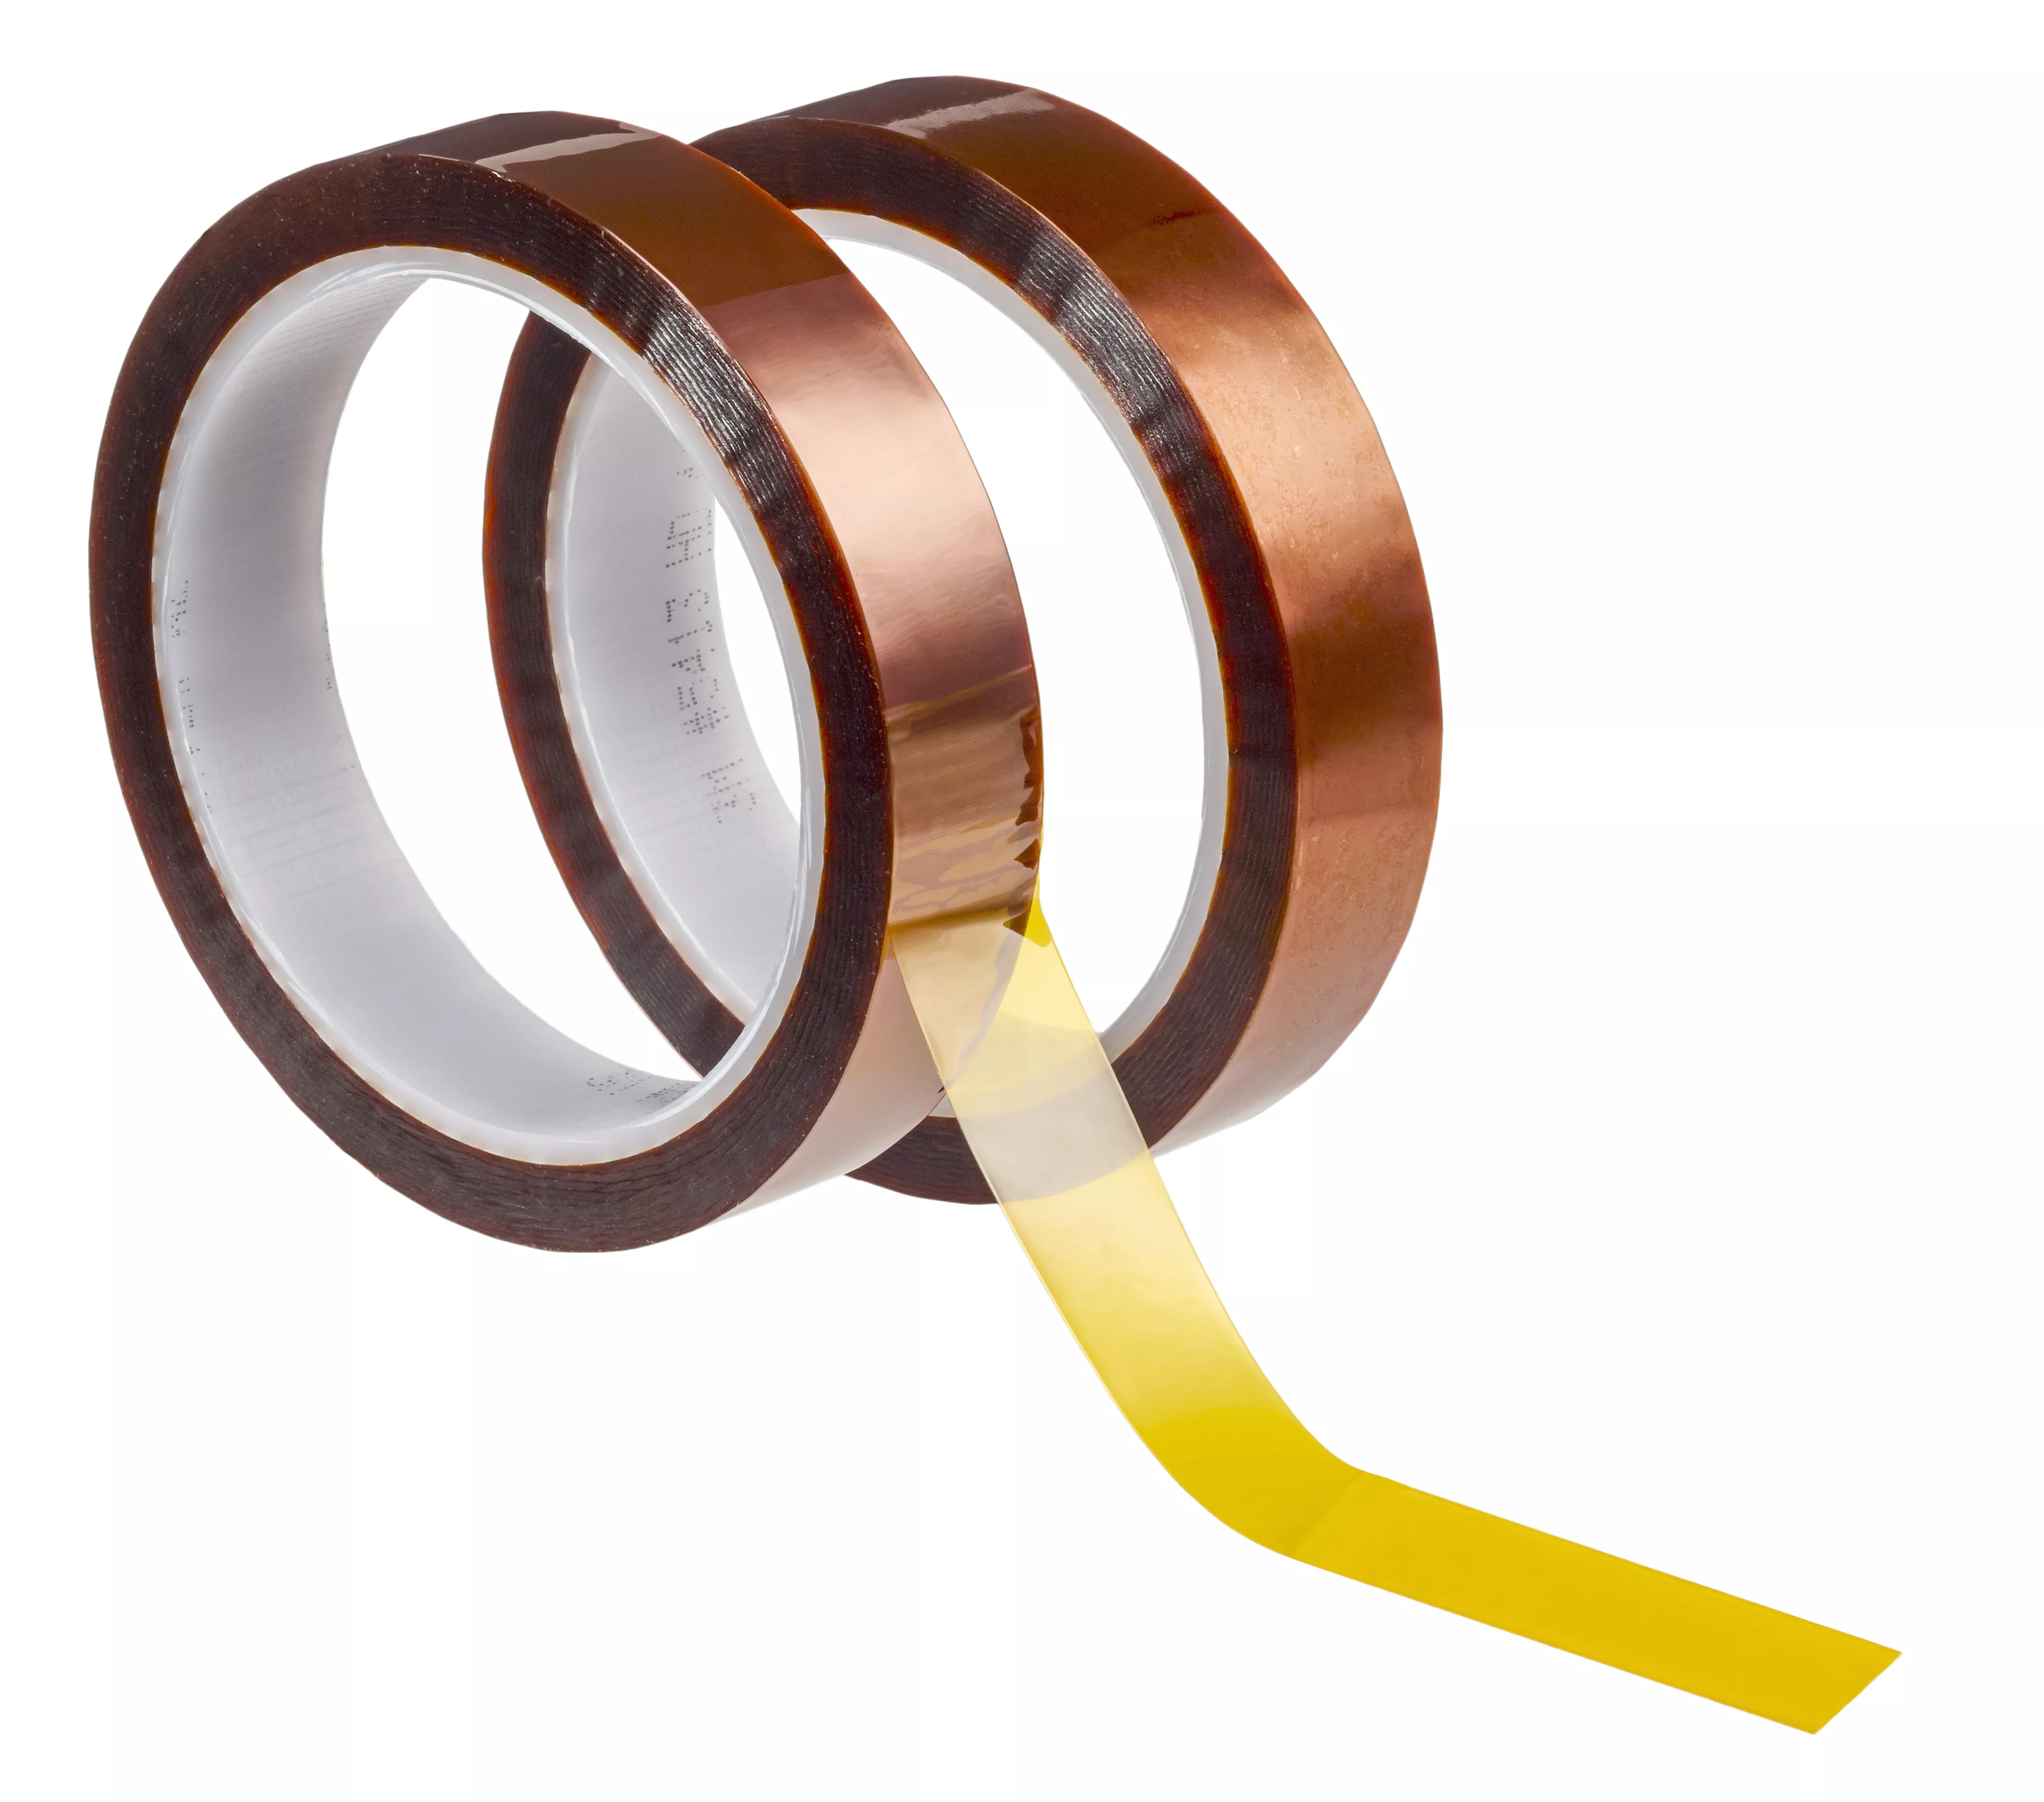 3M™ Polyimide Film Tape 5413 Amber, 5/8 in x 36 yds x 2.7 mil, 12/Case,
Blister